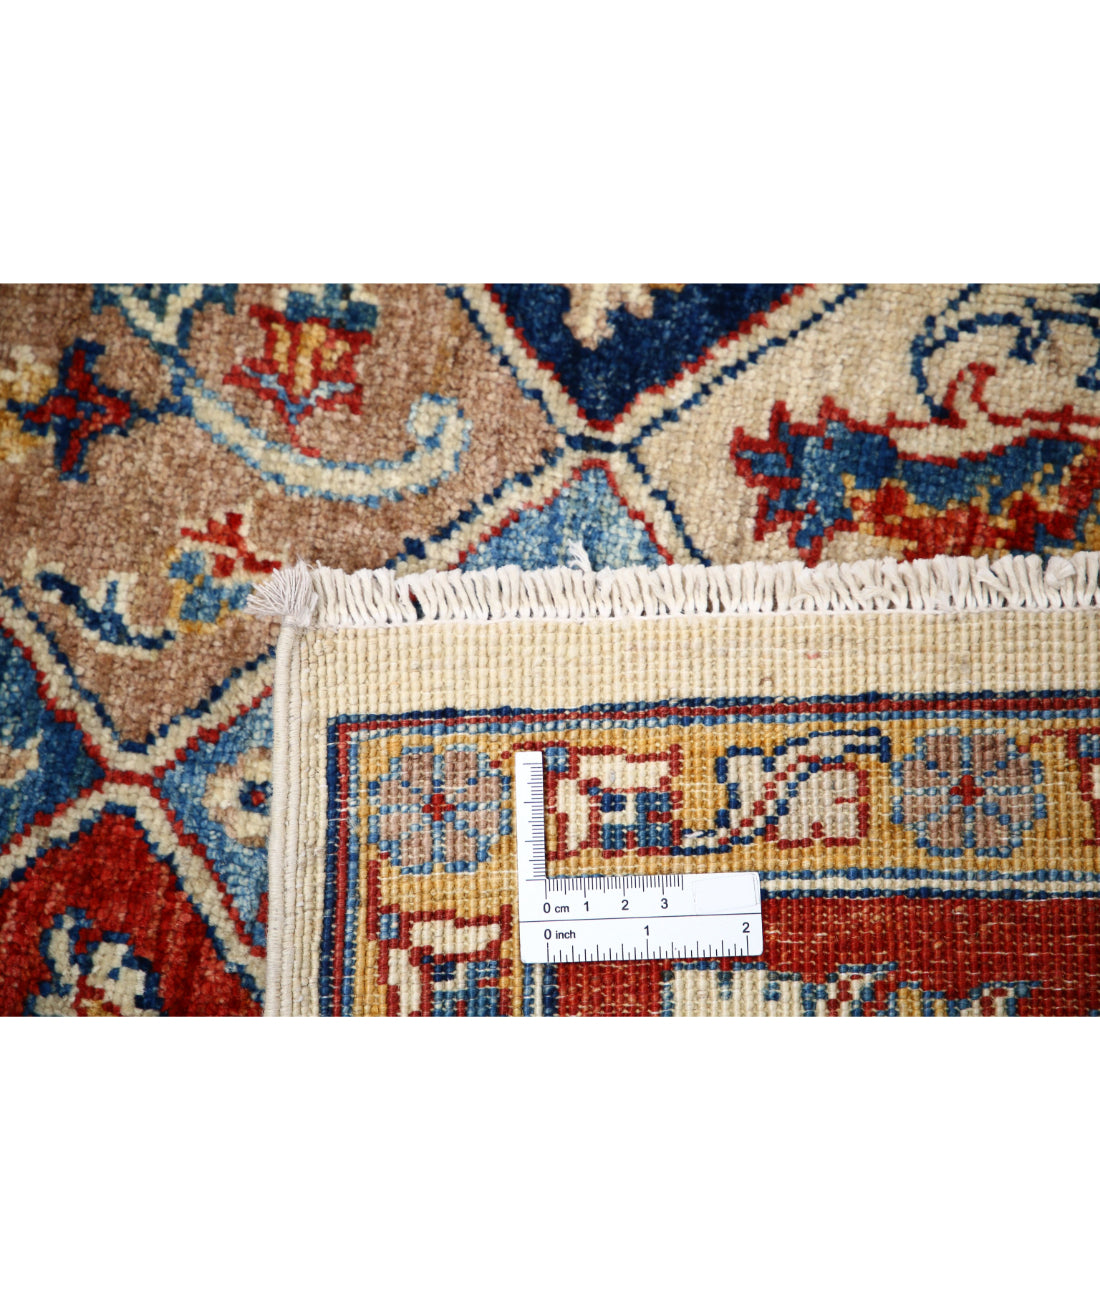 Ziegler 5'6'' X 7'10'' Hand-Knotted Wool Rug 5'6'' x 7'10'' (165 X 235) / Ivory / Red